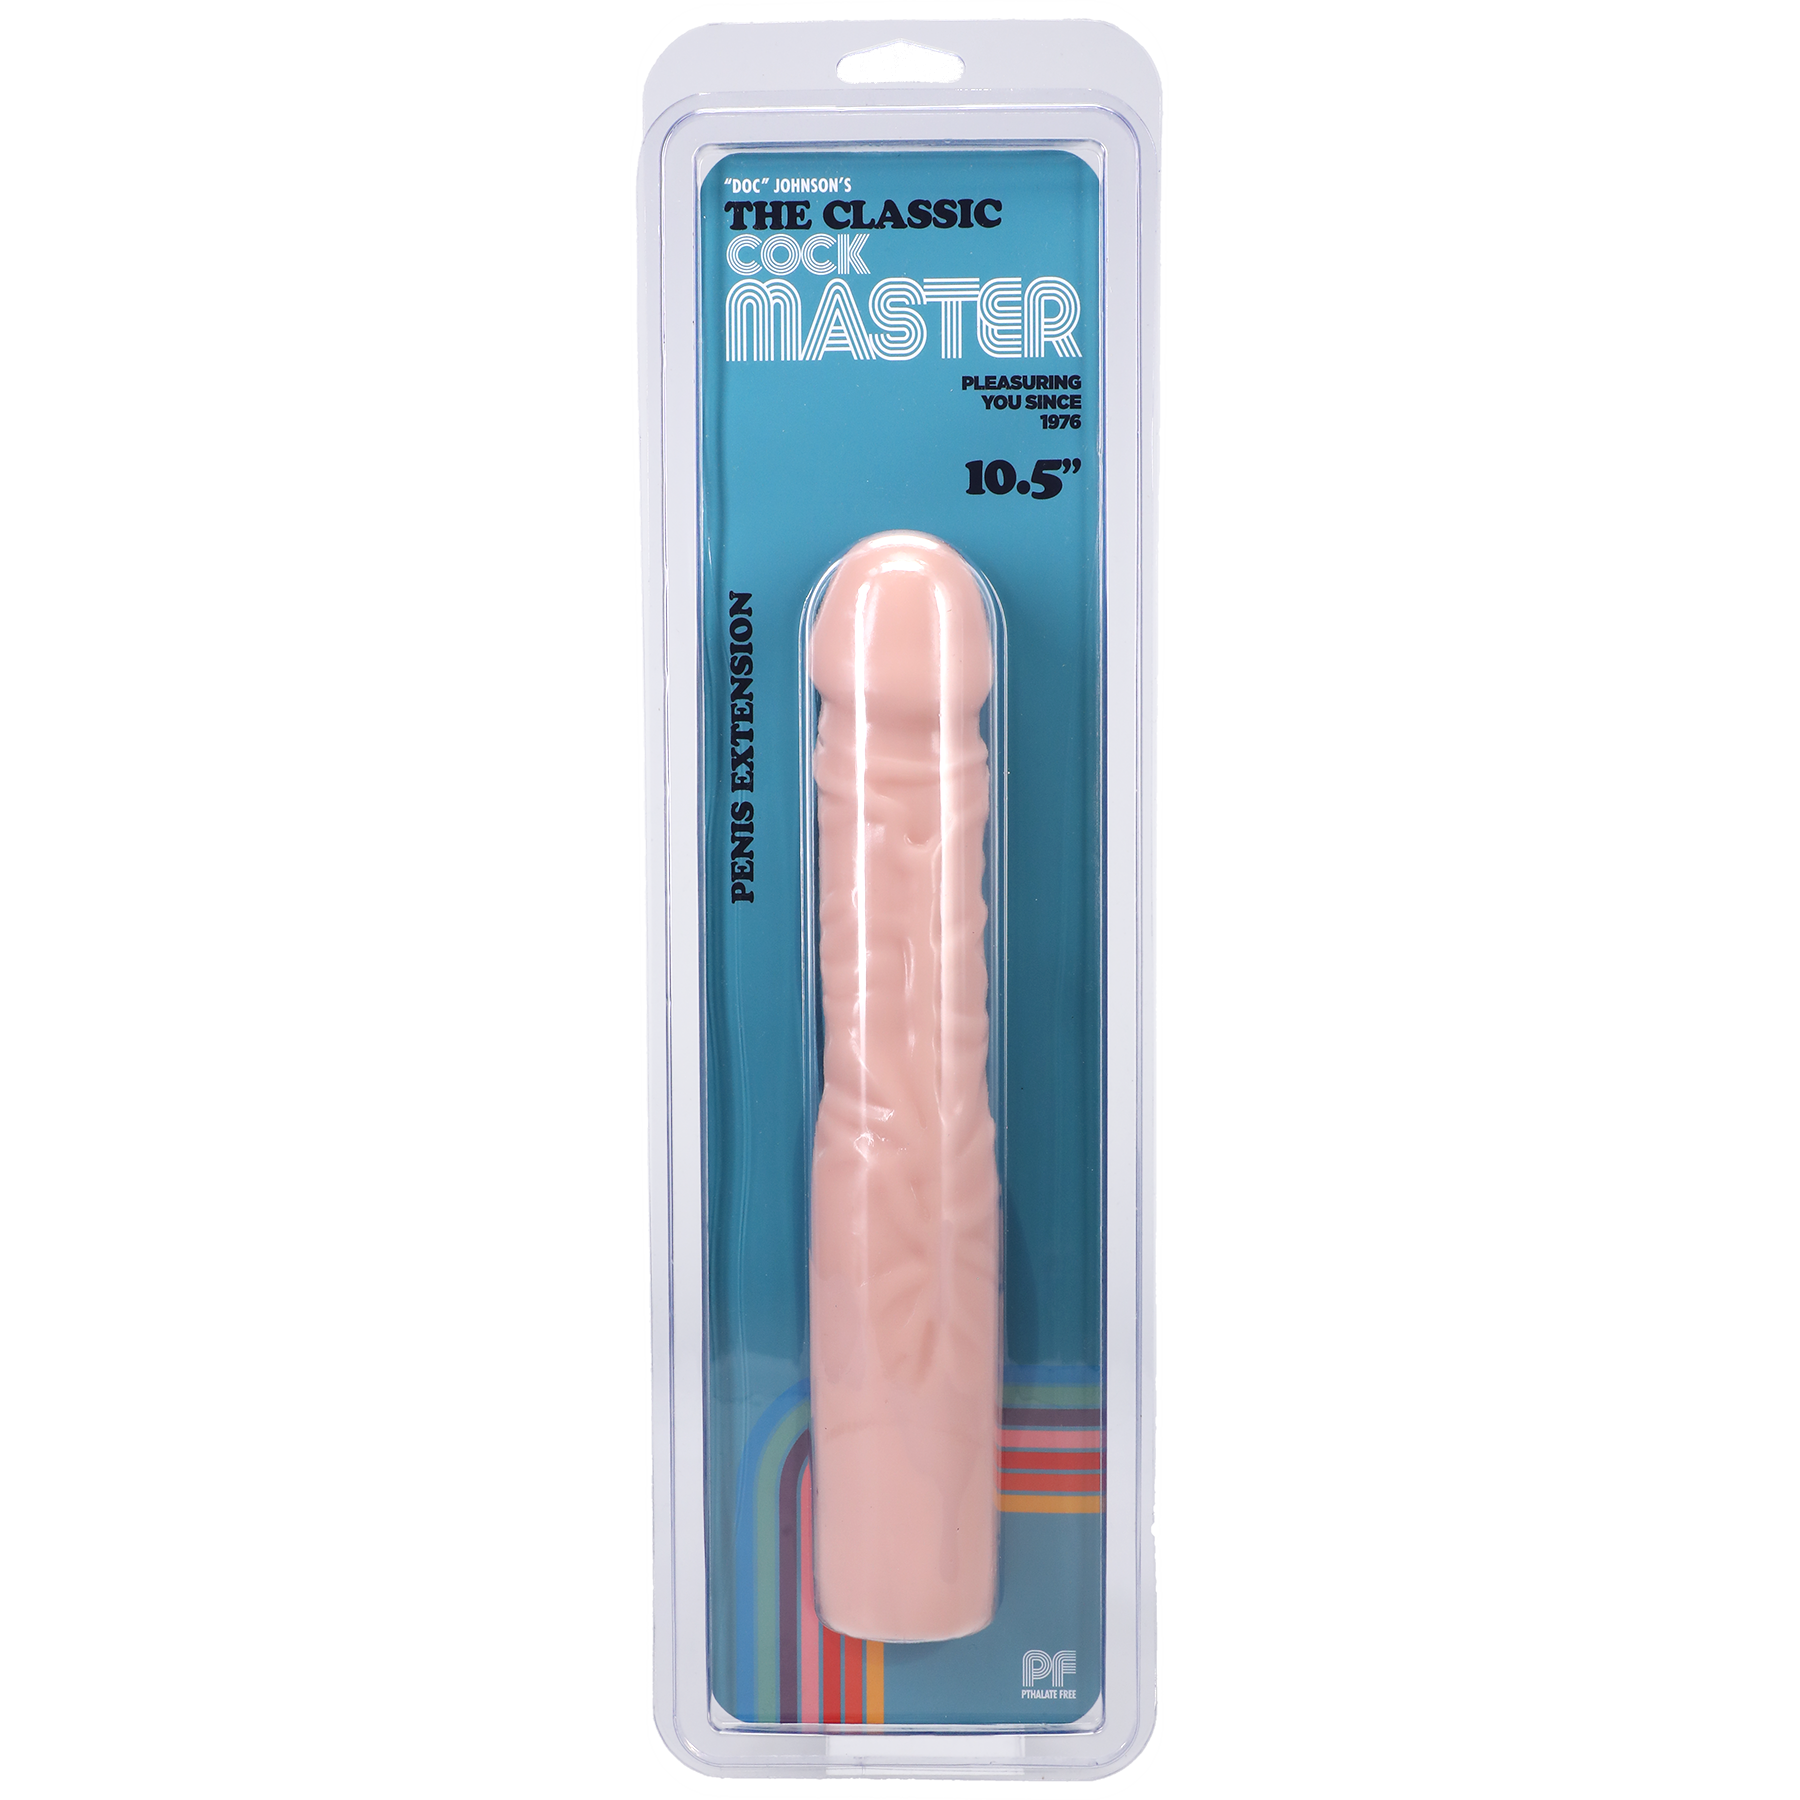 The Classic Cock Master 10.5 Inch Penis Extension